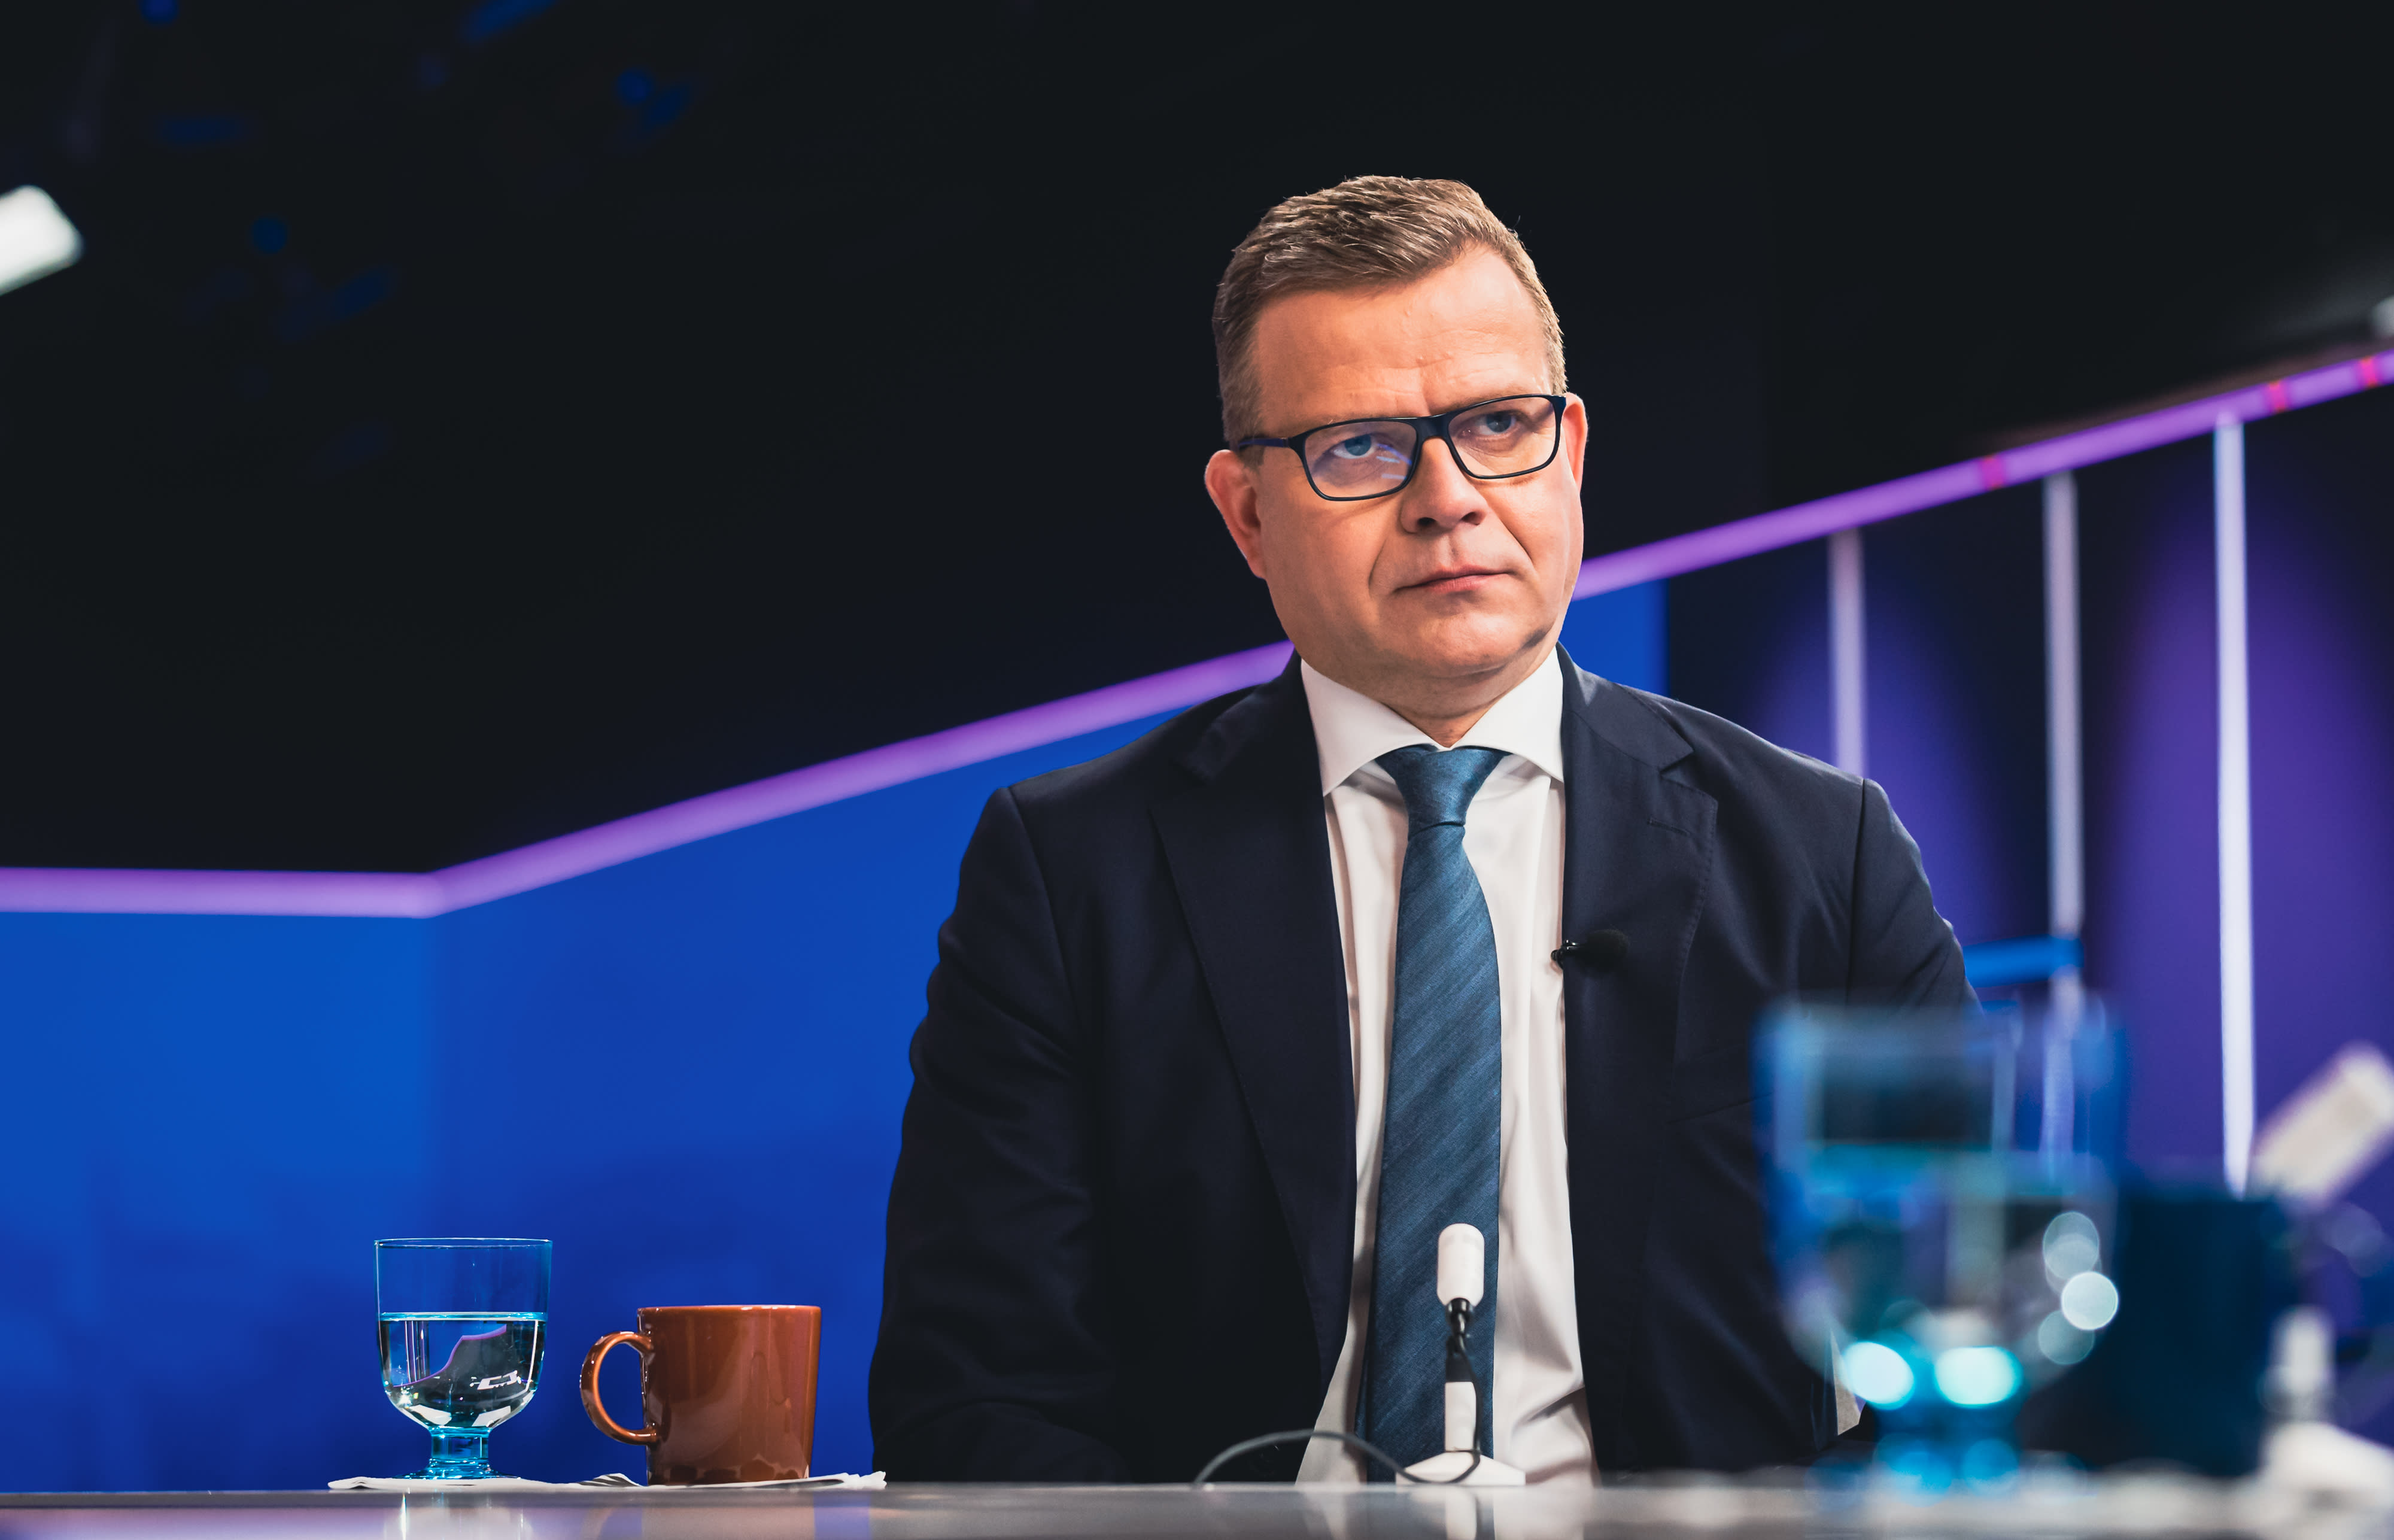 Opposition leader Orpo: The government coalition is incapacitated, but would probably not fall